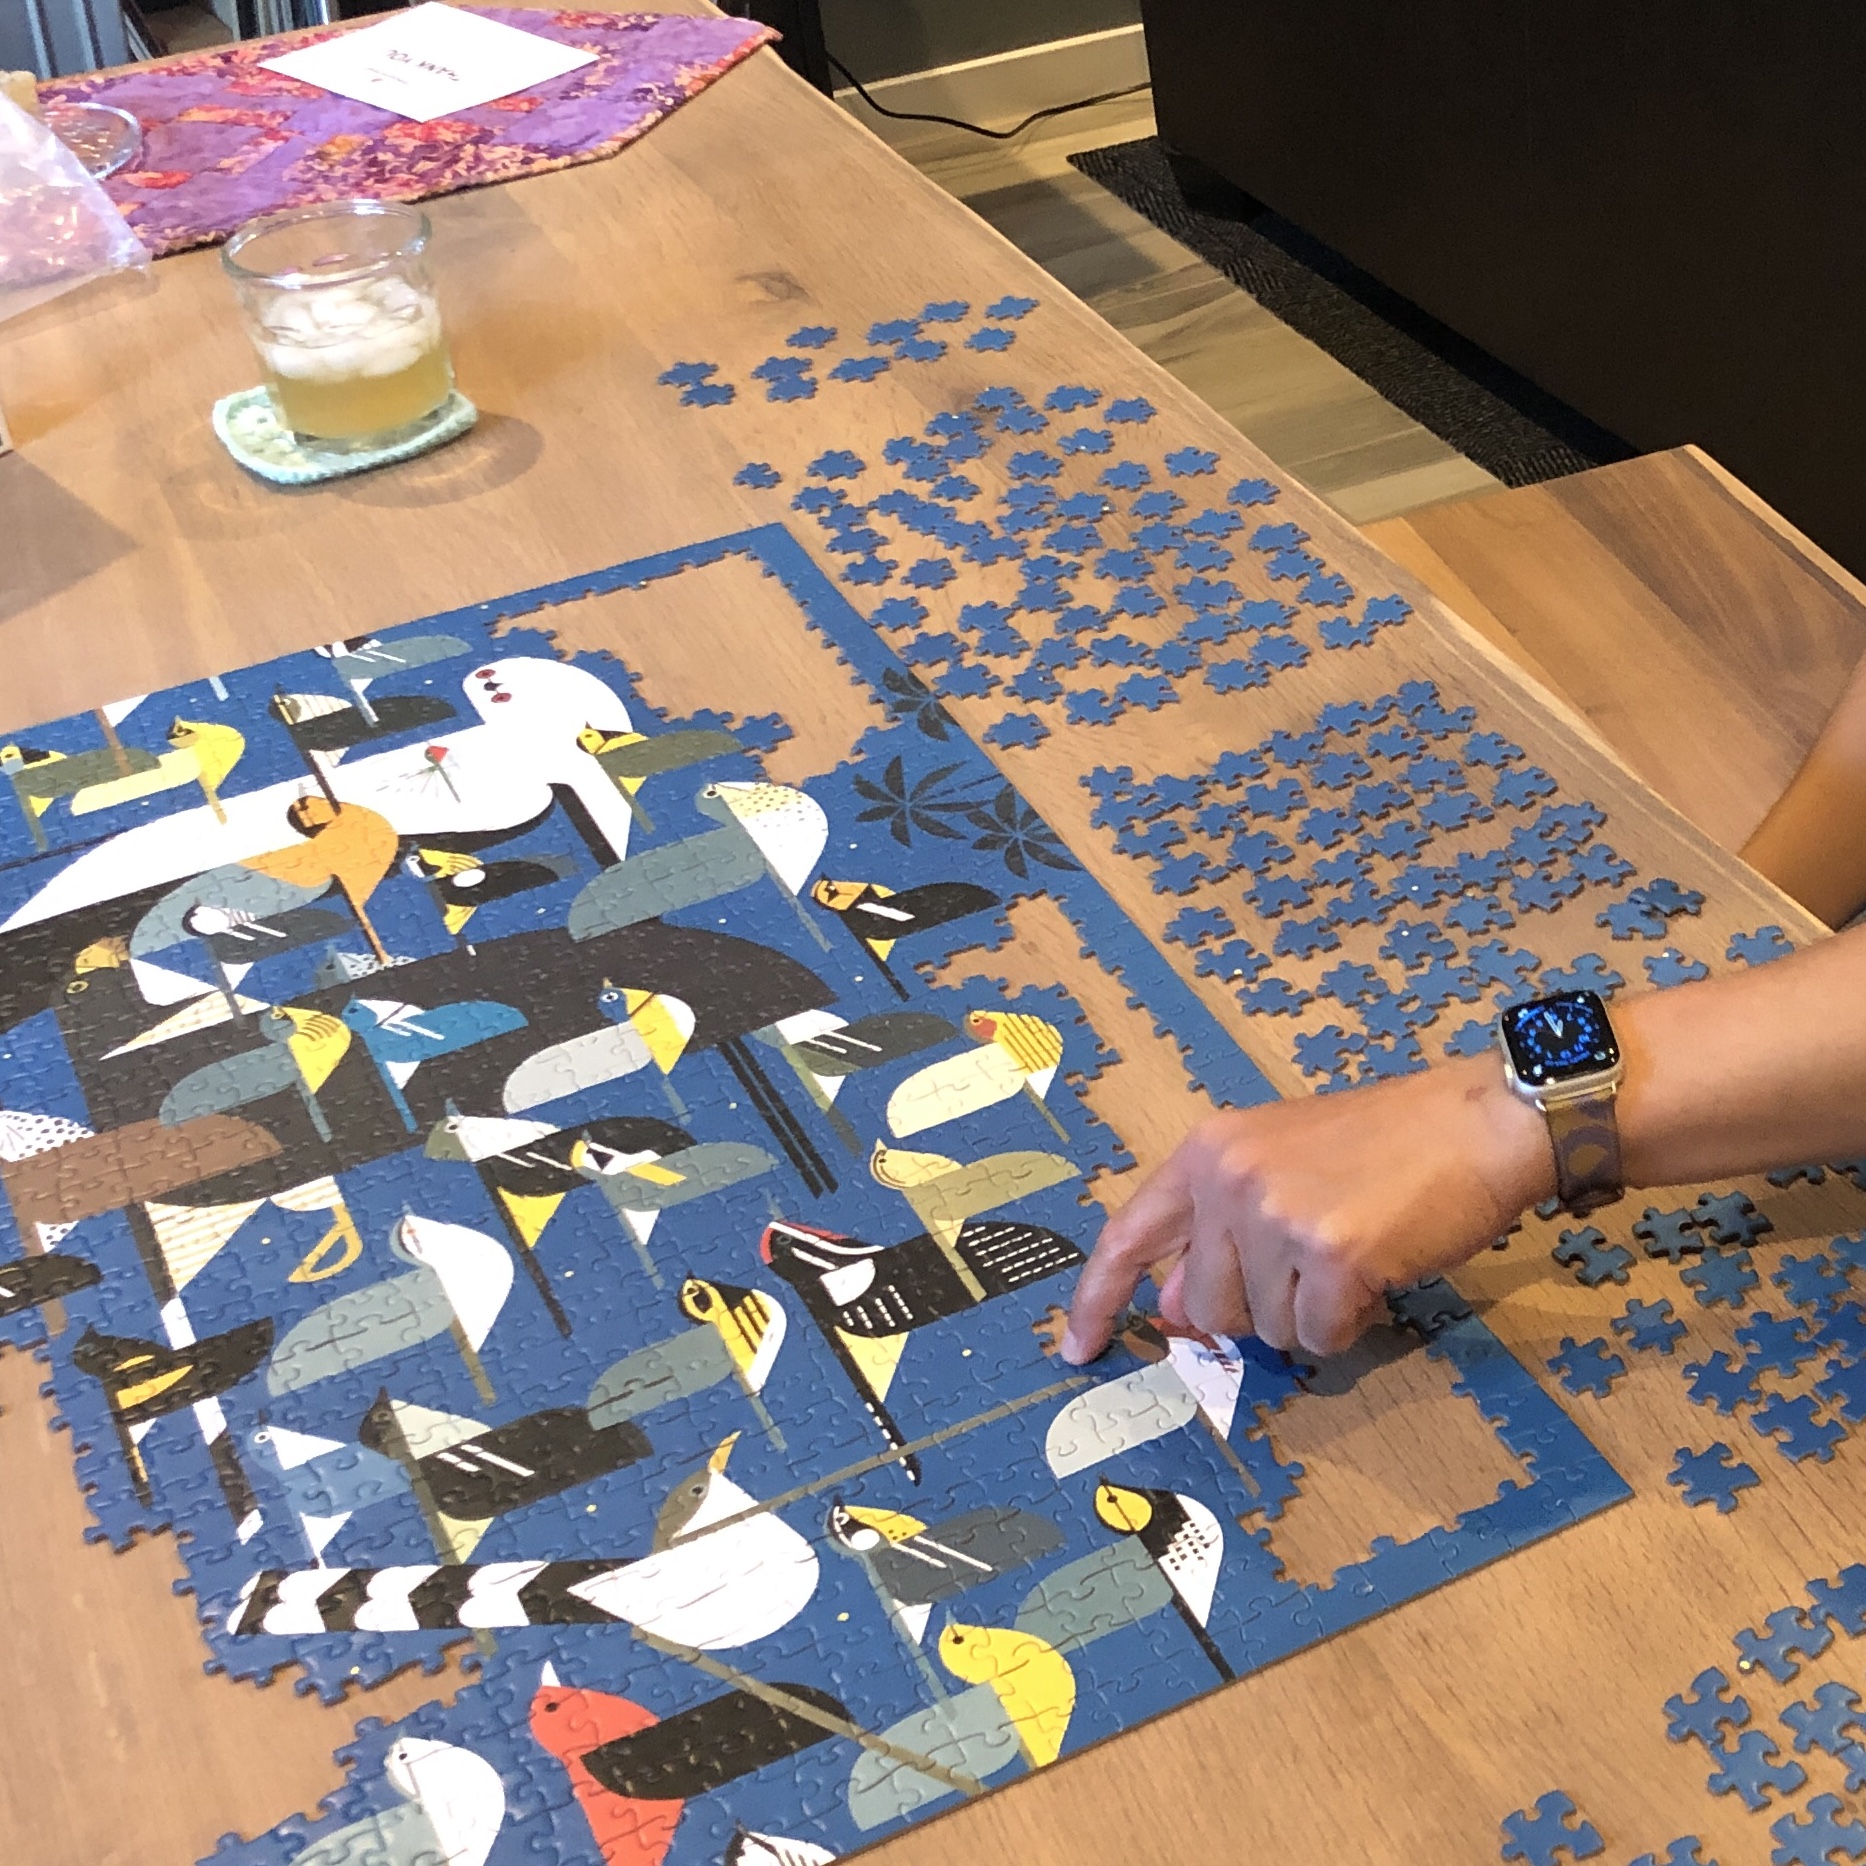 A partially completed puzzle with many neatly arranged pieces placed beside it 